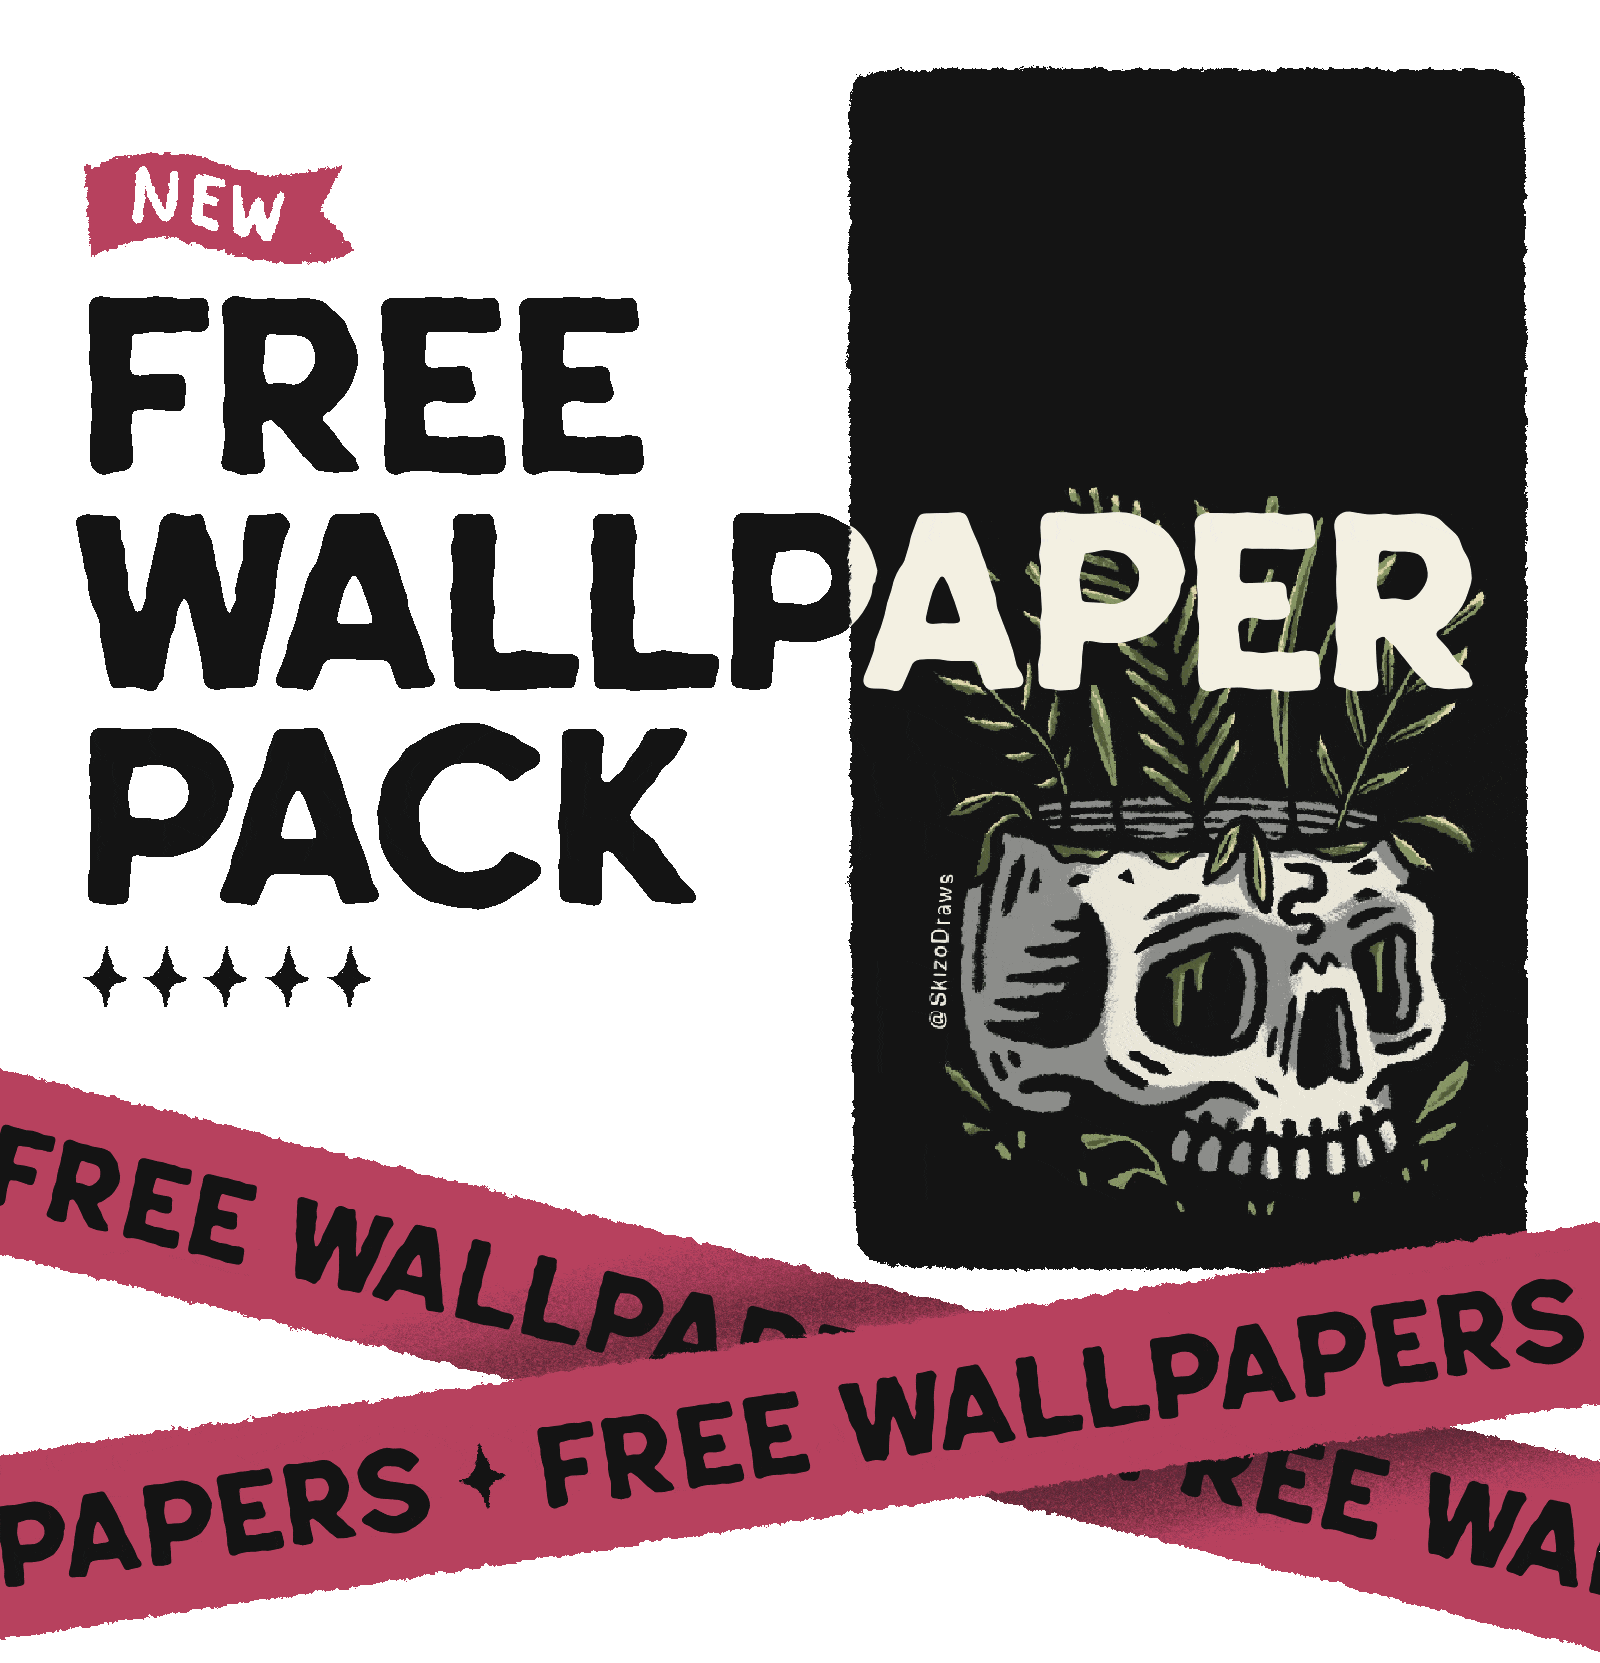 New Free Wallpaper Pack - Download 80+ Free wallpapers to customize your mobile phone now